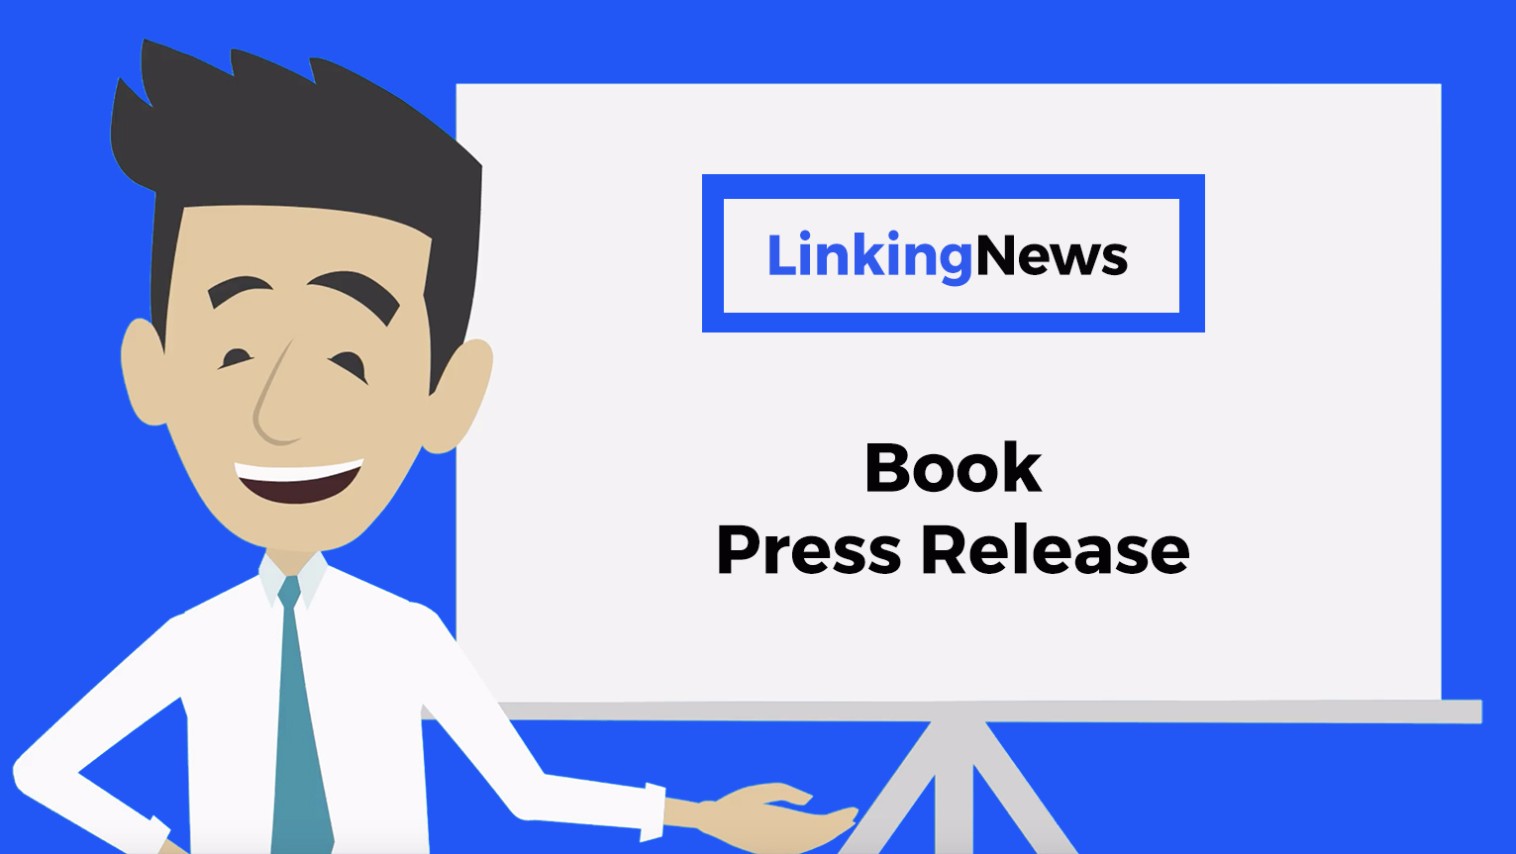 Linking News - How To Write A Press Release For A Book, Book Press